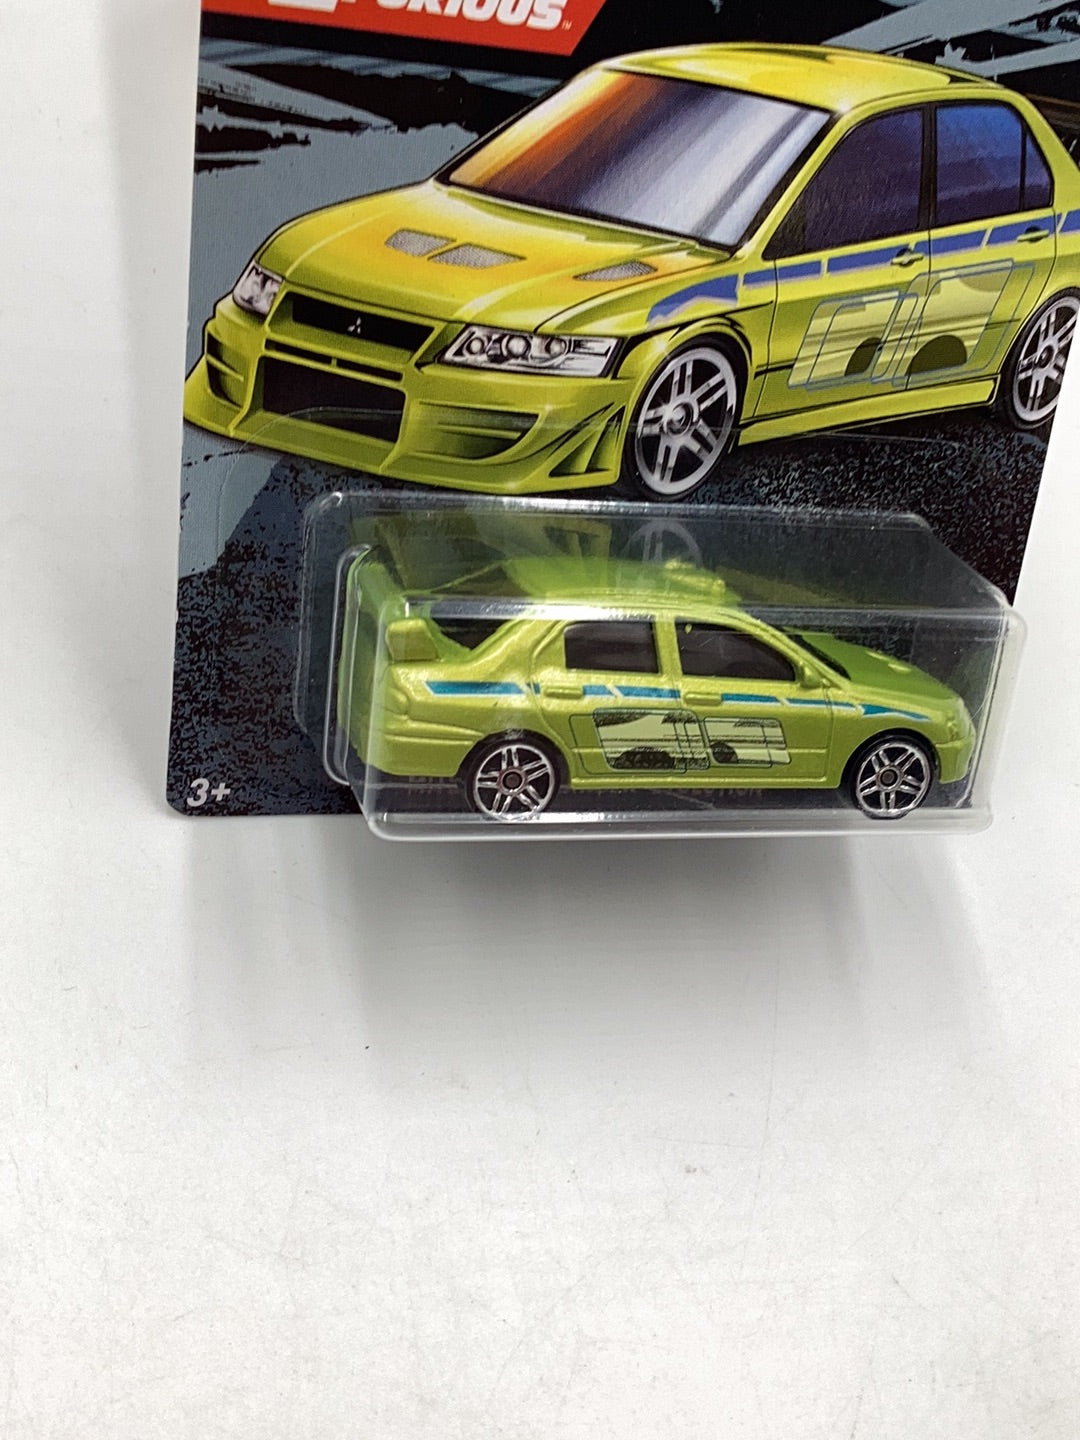 Hot wheels fast and furious 3/6 Mitsubishi Lancer Evolution with protector